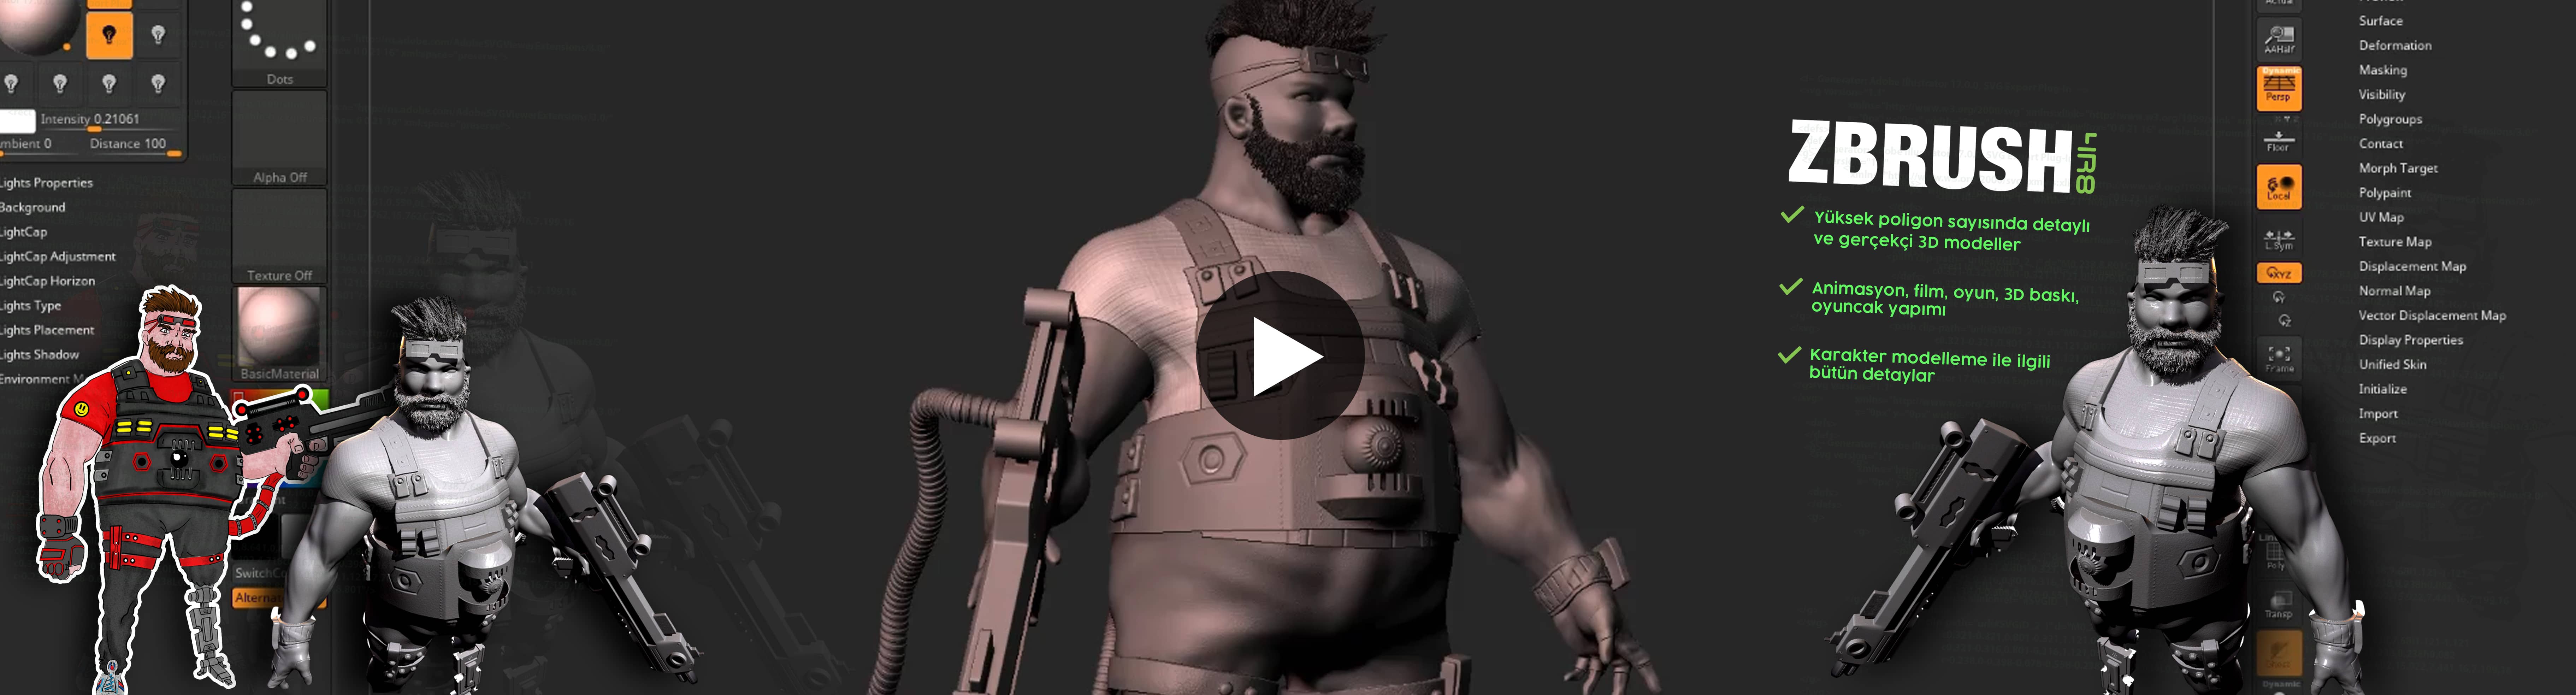 zbrush 4r8 patch 2